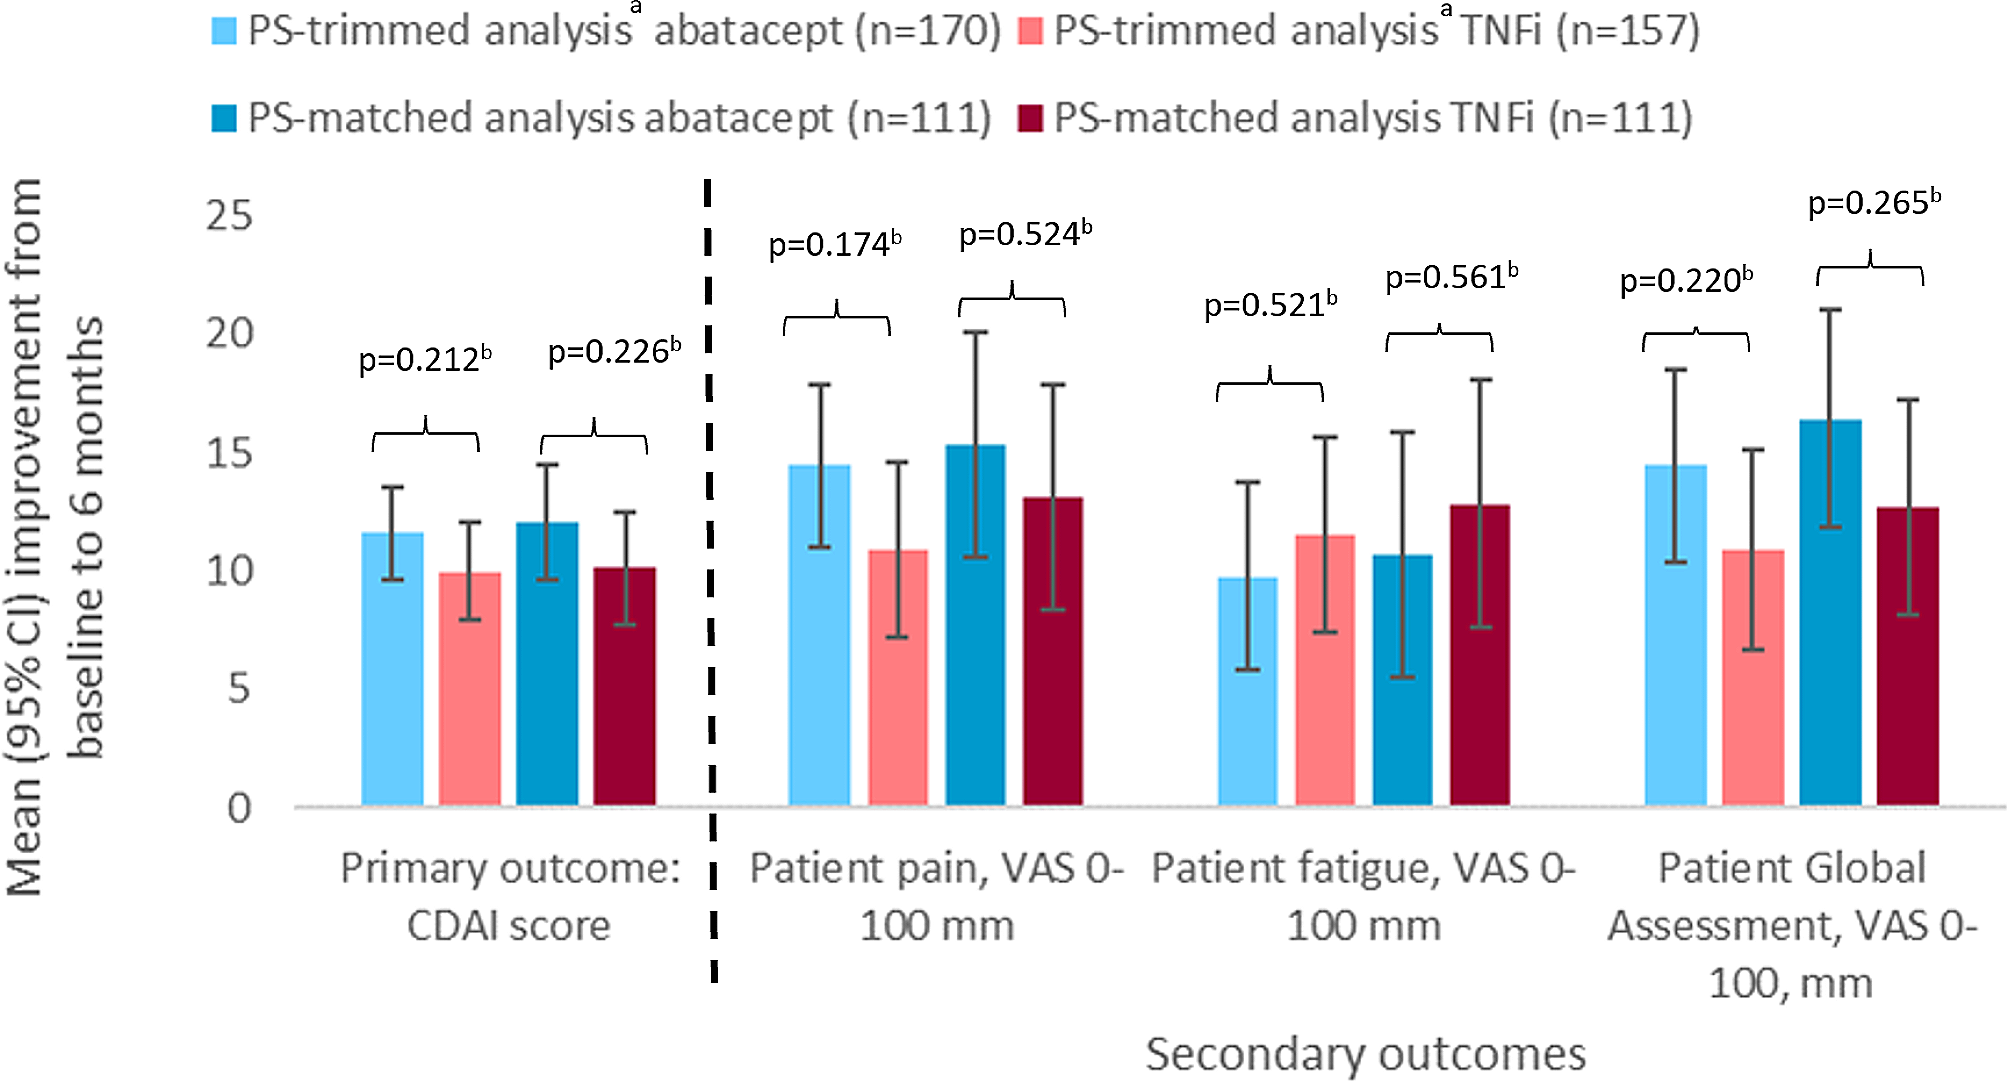 Comparative effectiveness of abatacept versus TNF inhibitors in rheumatoid arthritis patients who are ACPA and shared epitope positive